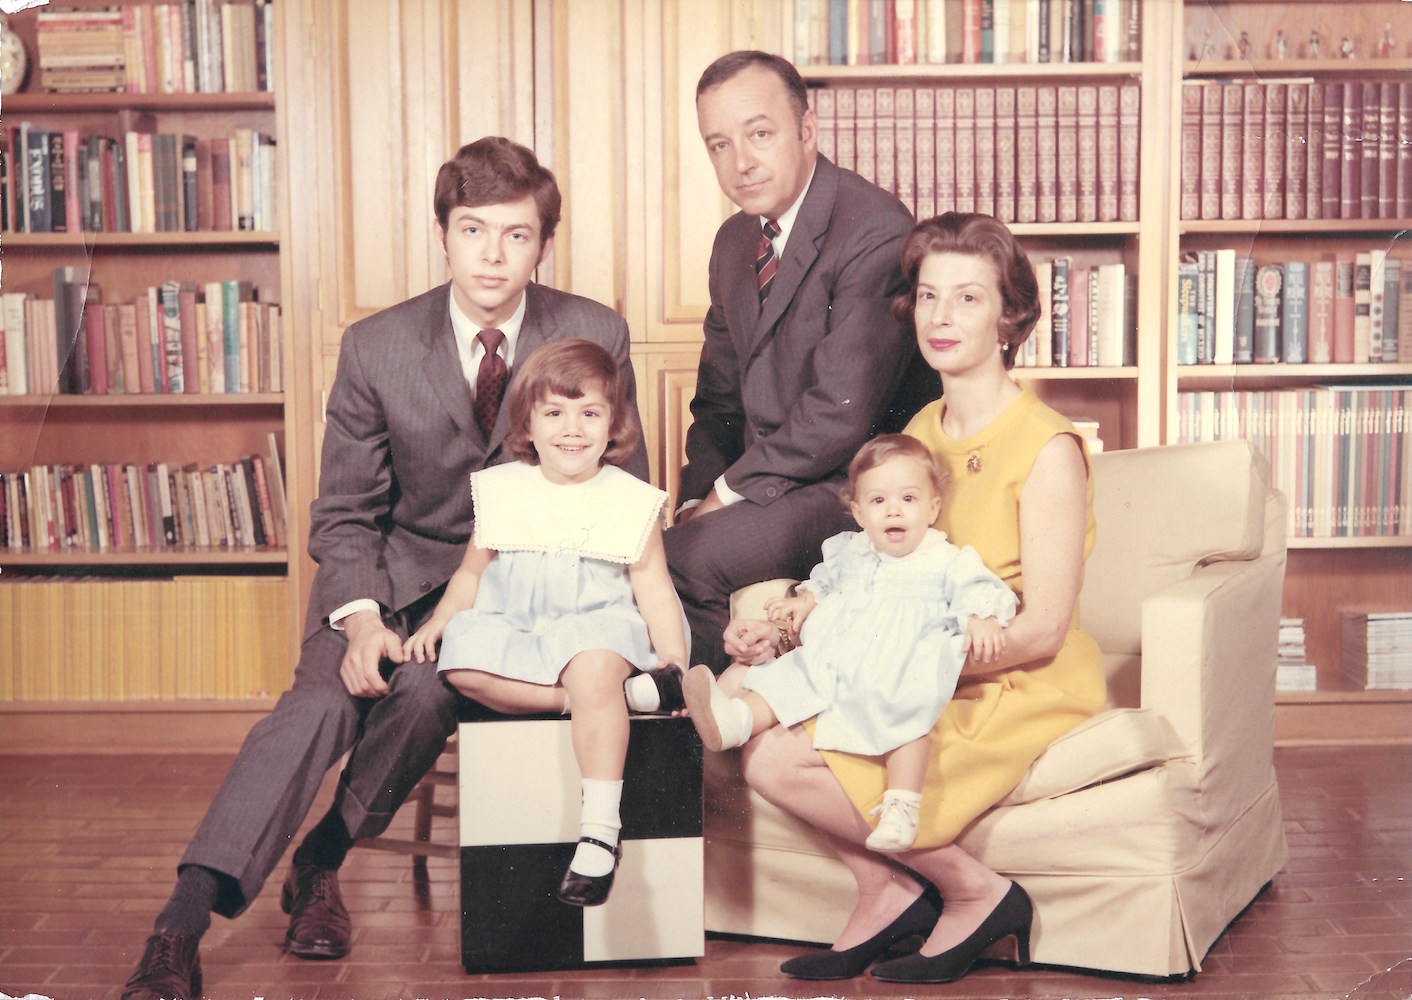 Rags with his sisters, father, and stepmother for a family portrait, McComb, MS, circa 1970.